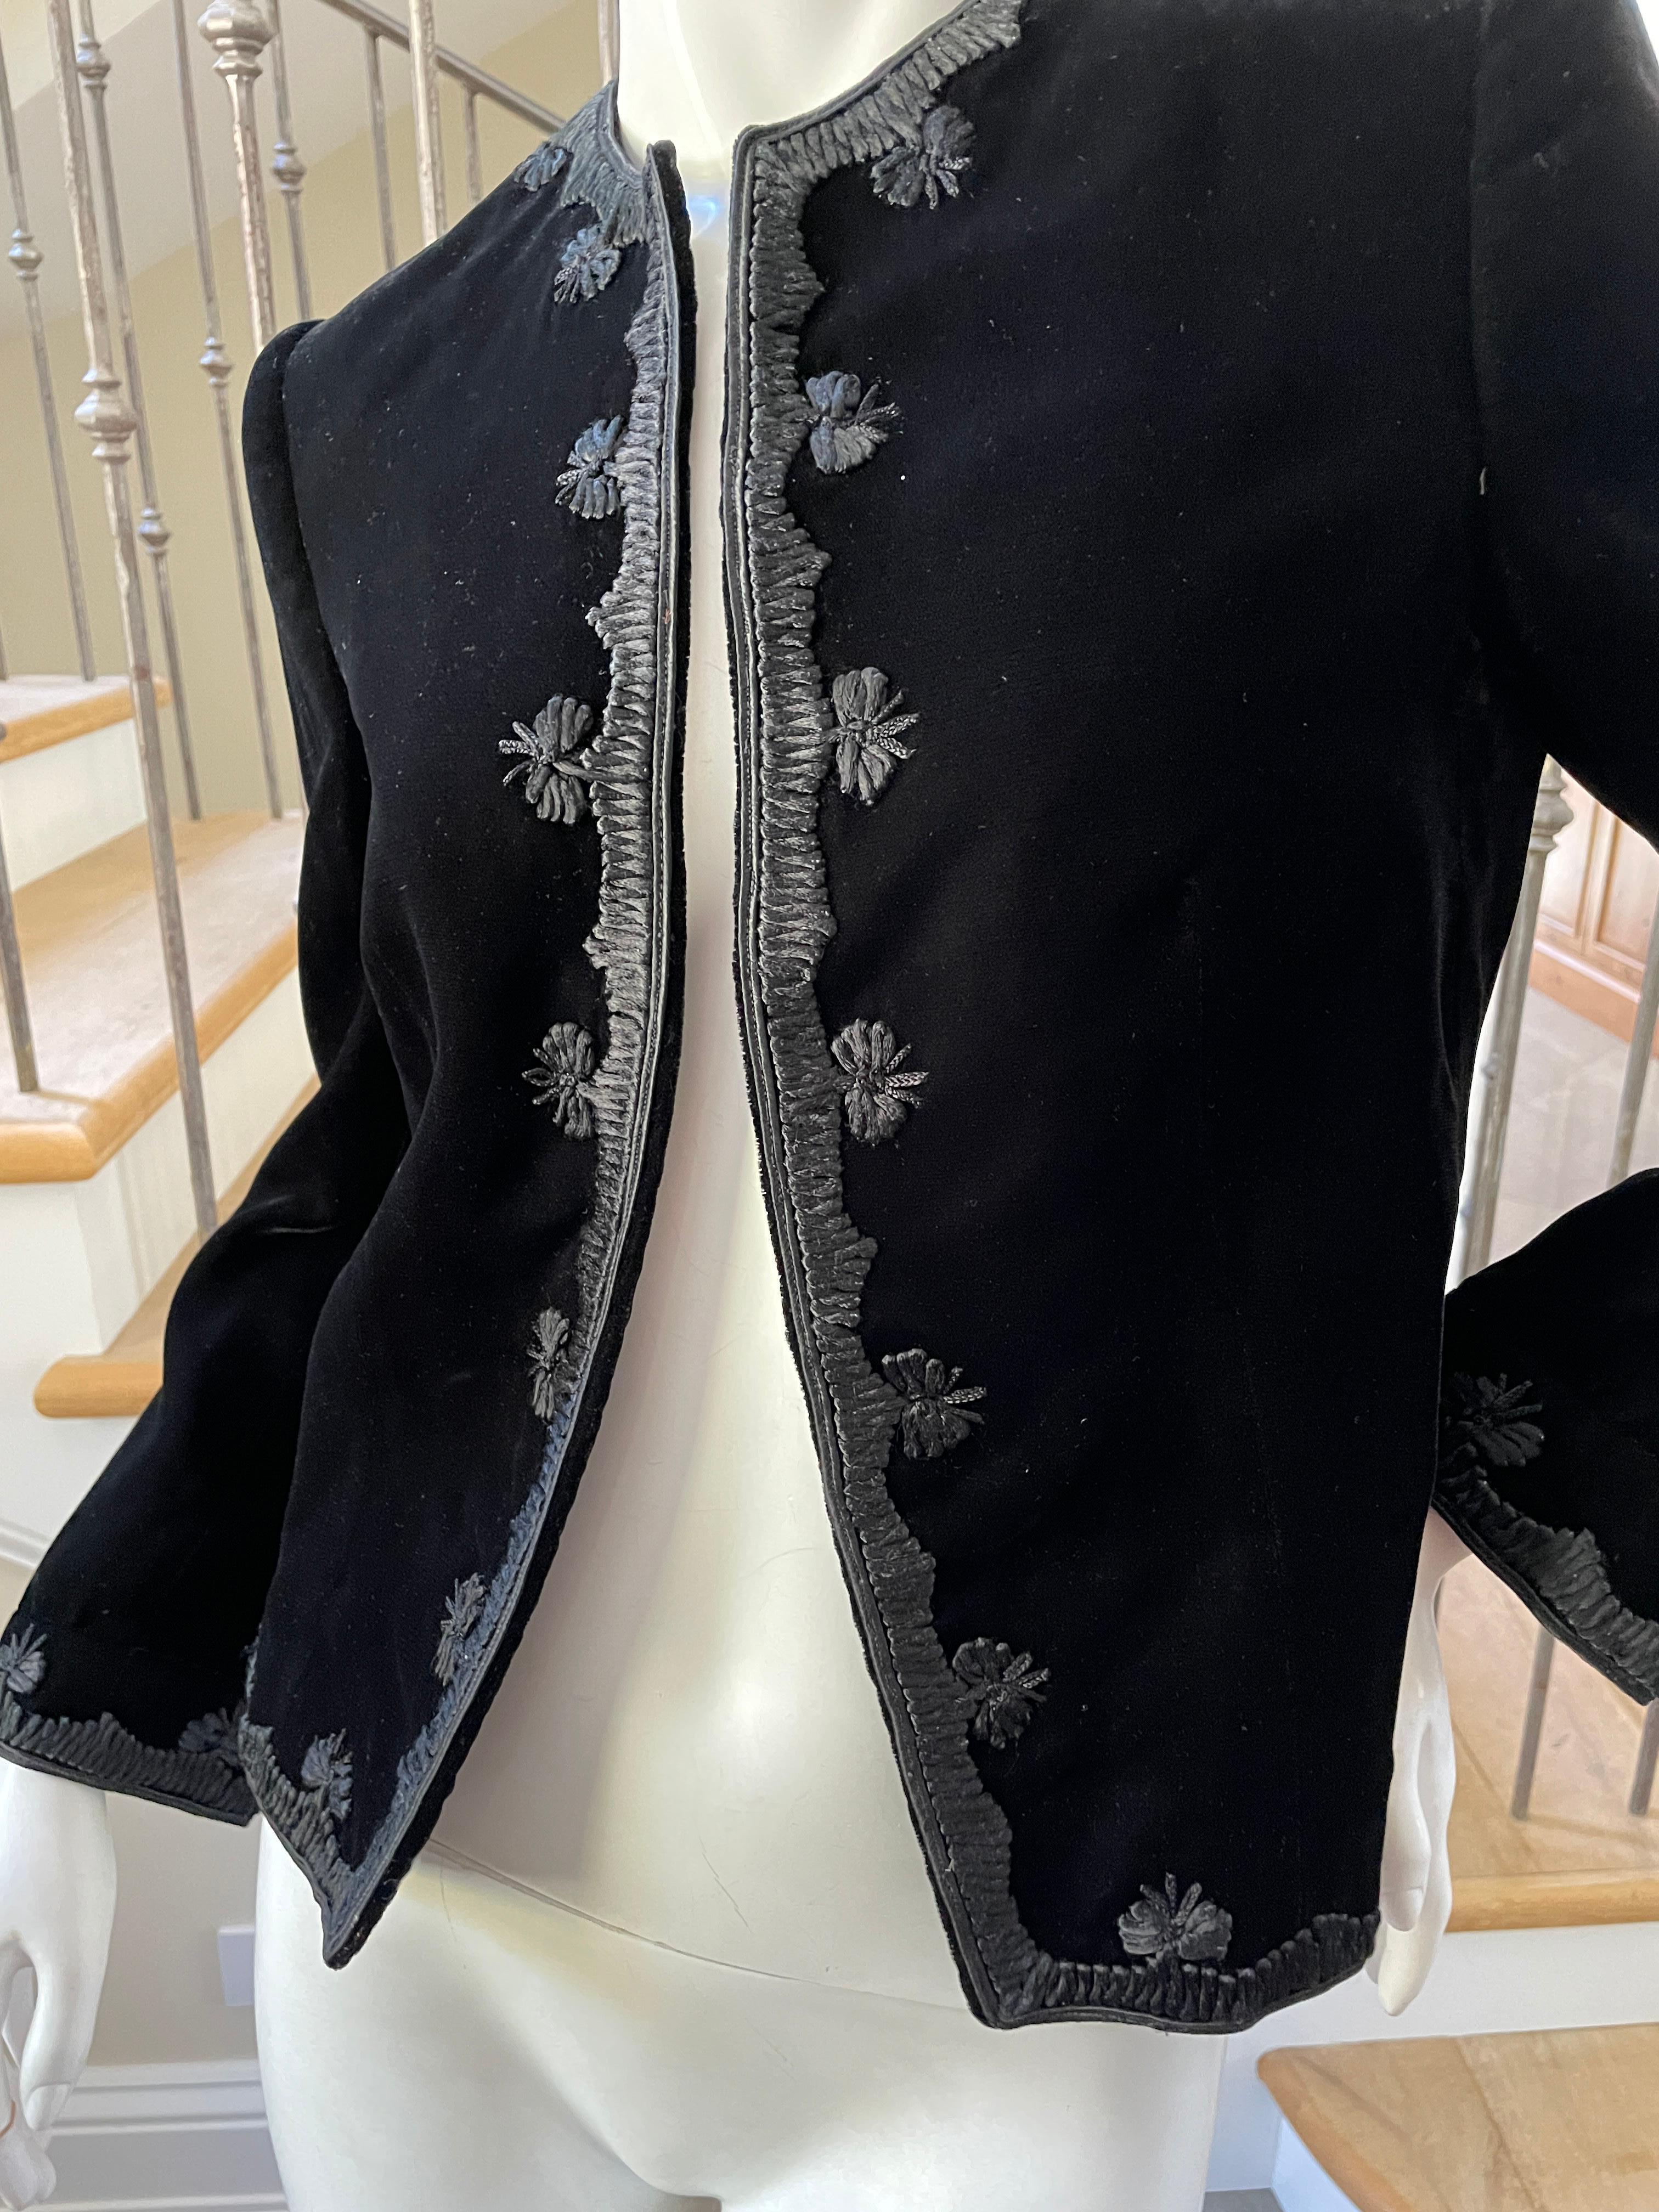 Jean-Louis Couture 1960's Black Velvet Jacket with Embroidered Details In Good Condition For Sale In Cloverdale, CA